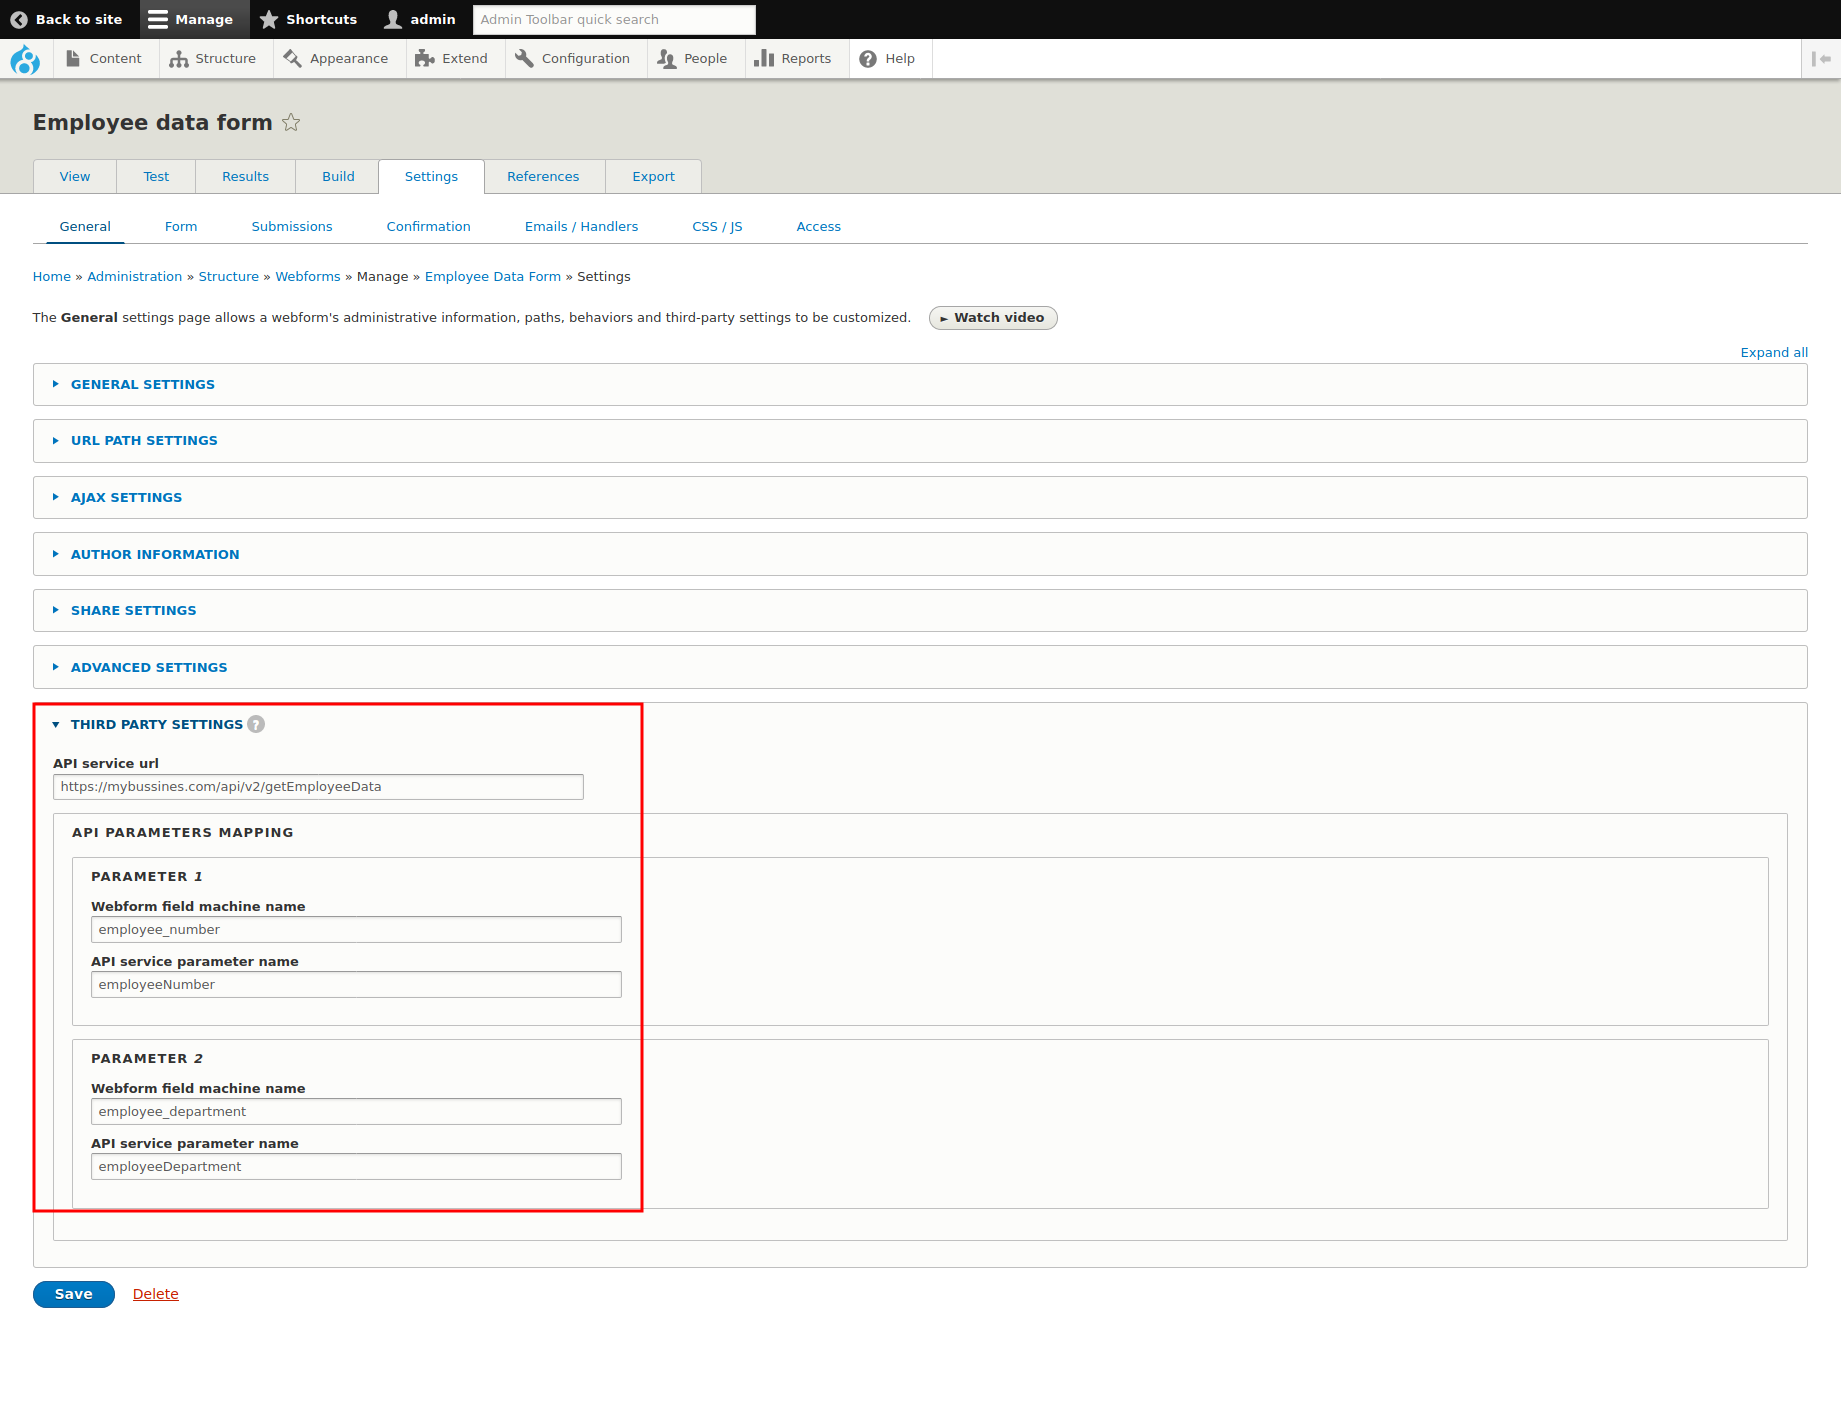 Webforms and integration with third party services - Image 3